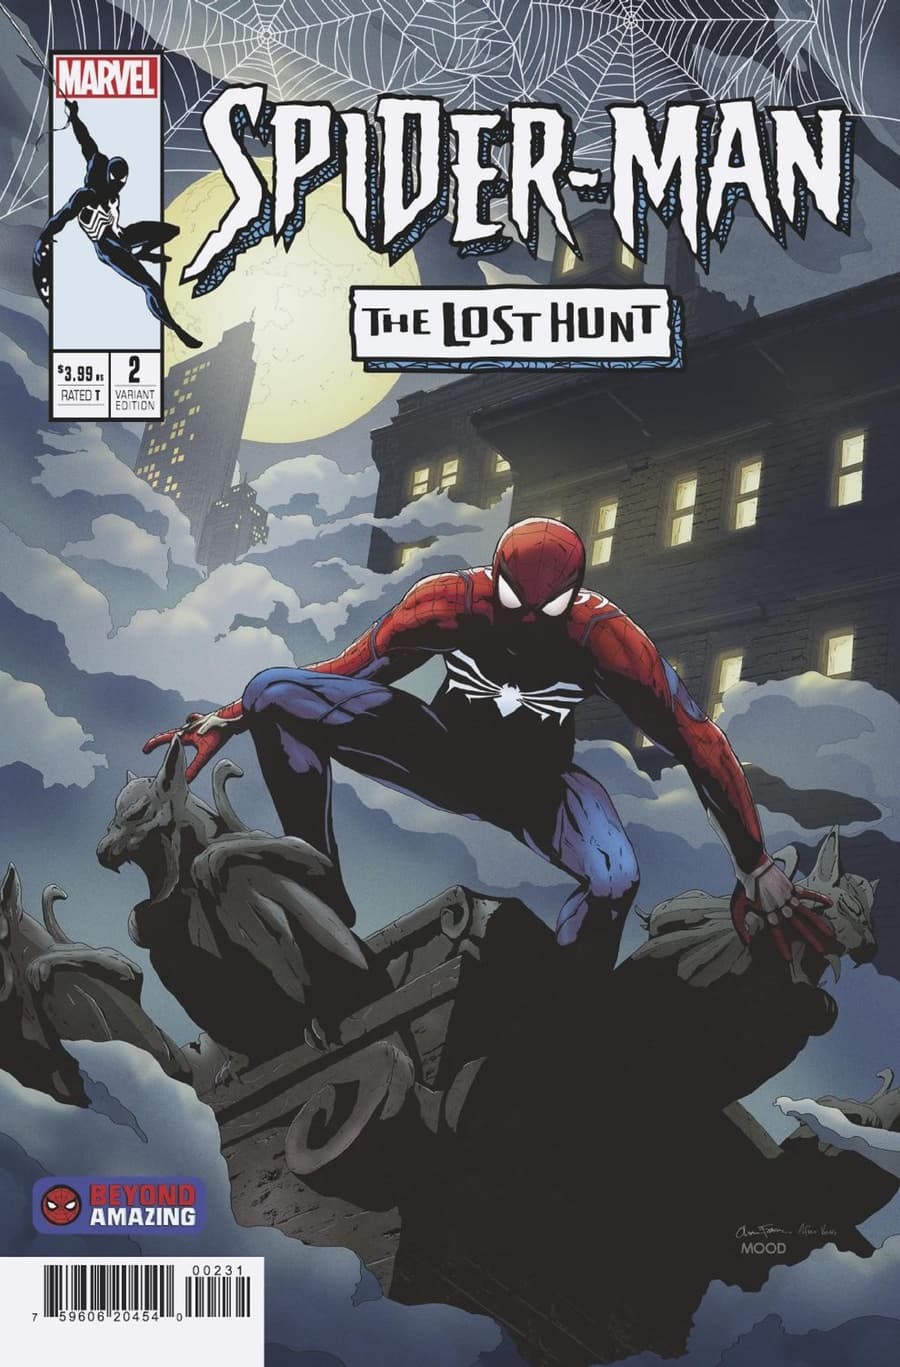 SPIDER-MAN: THE LOST HUNT #2 Insomniac Beyond Amazing Variant Cover by OLIVER FETSCHER